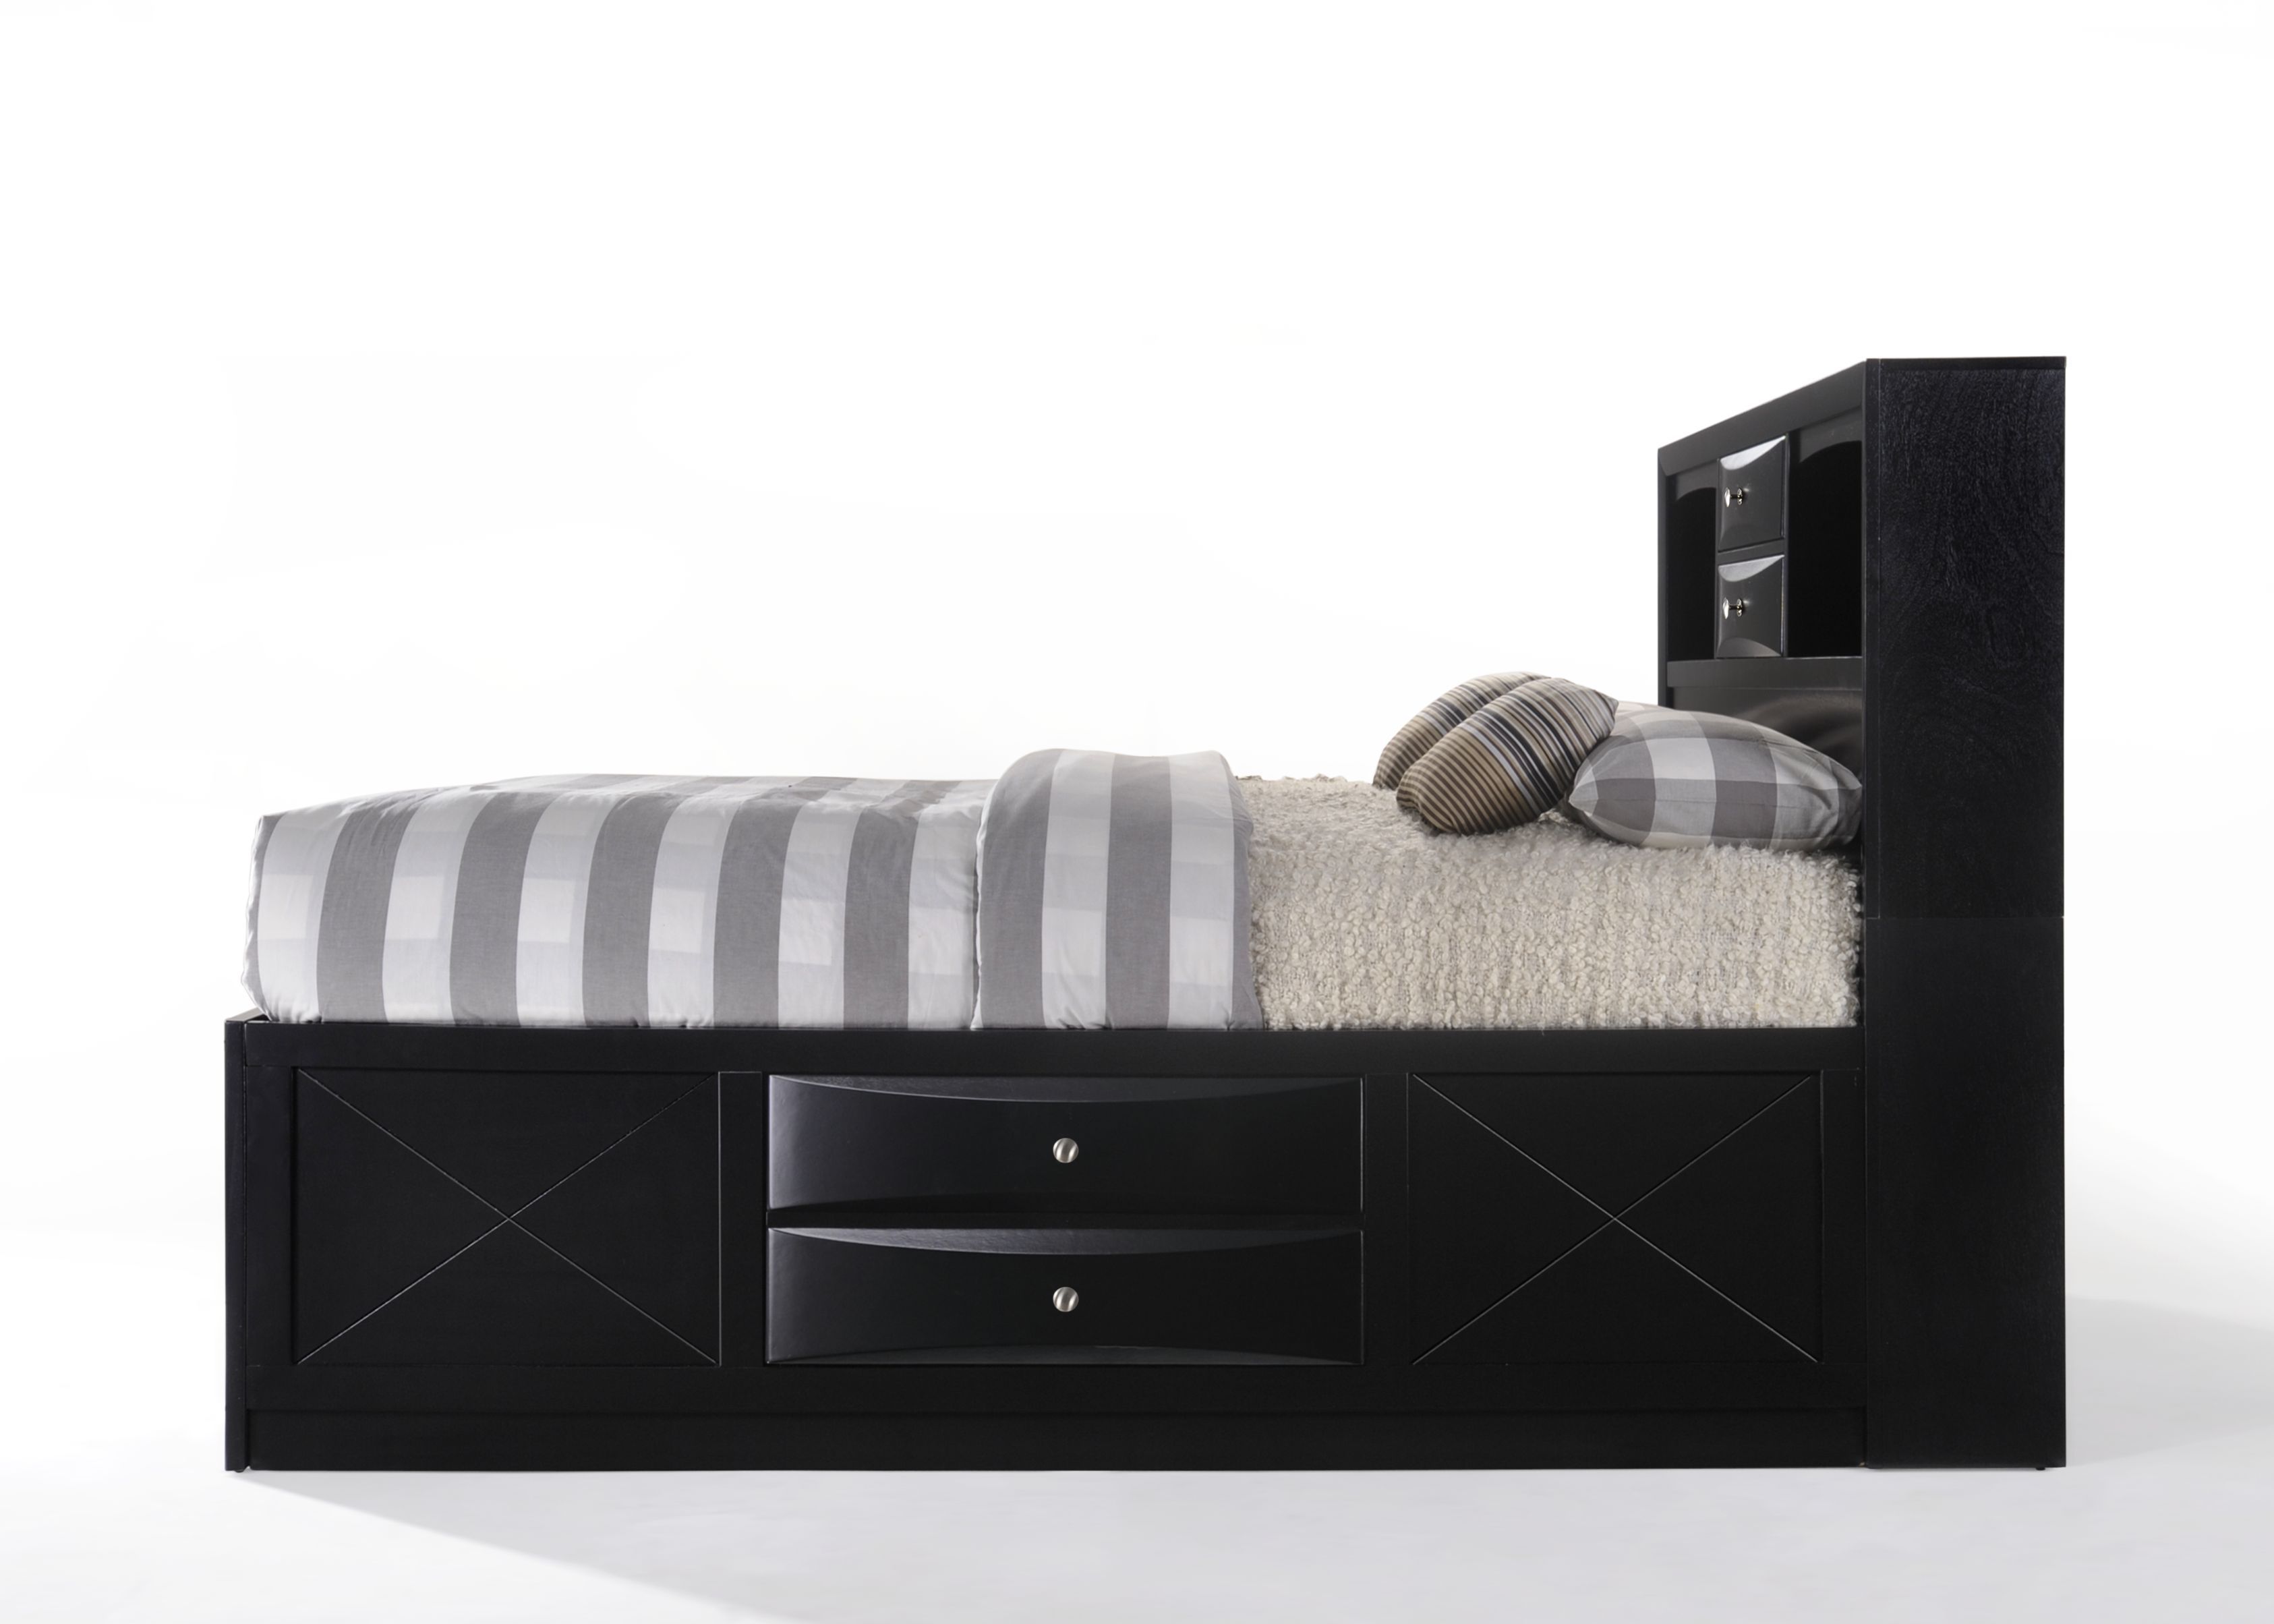 Miekor Furniture Ireland Full Bed in Black - image 4 of 6